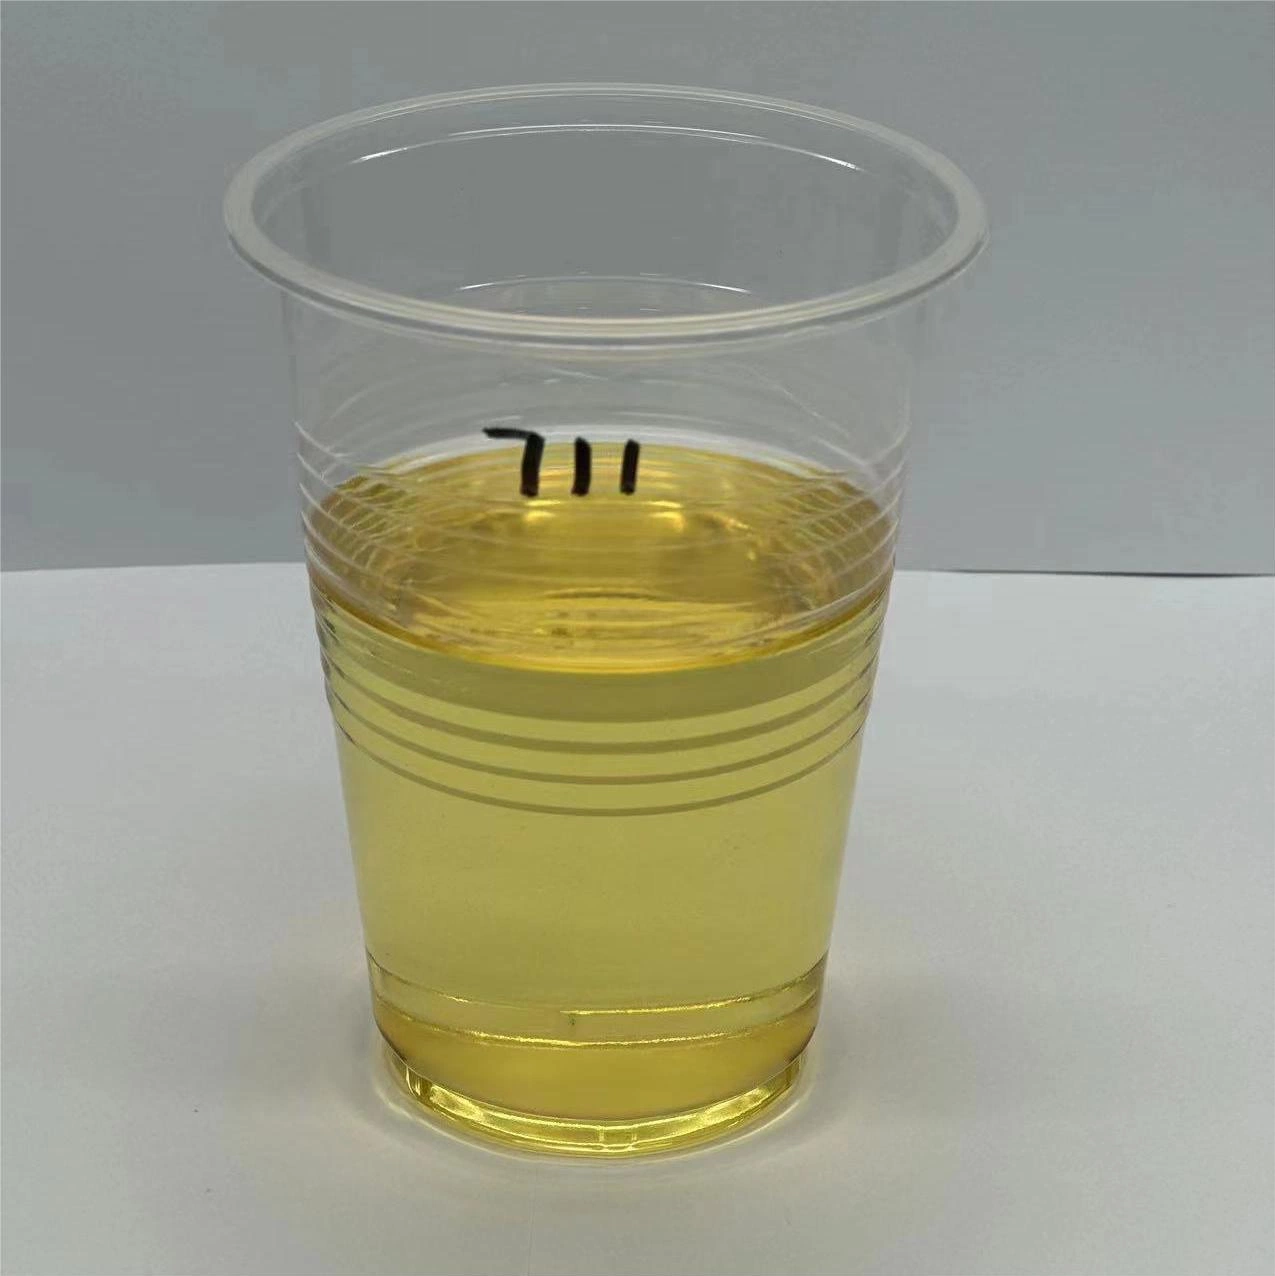 Resin 711 Vinyl Ester Resin Bisphenol-a Epoxy Resin for Corrosion Resistant FRP Products